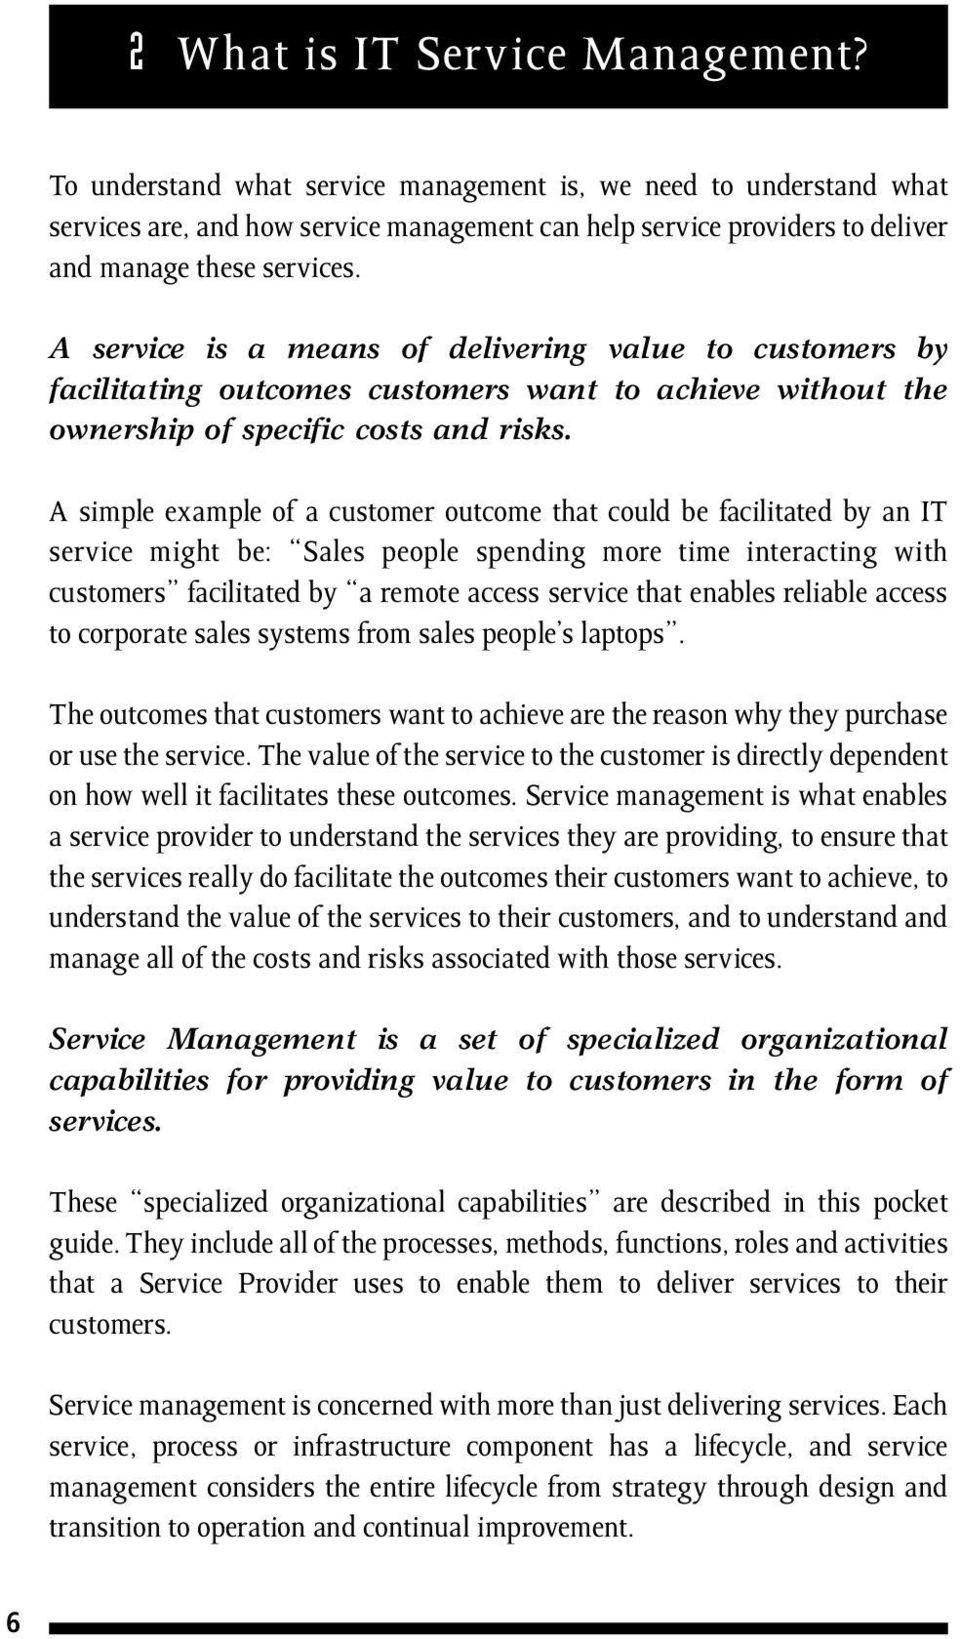 A service is a means of delivering value to customers by facilitating outcomes customers want to achieve without the ownership of specific costs and risks.